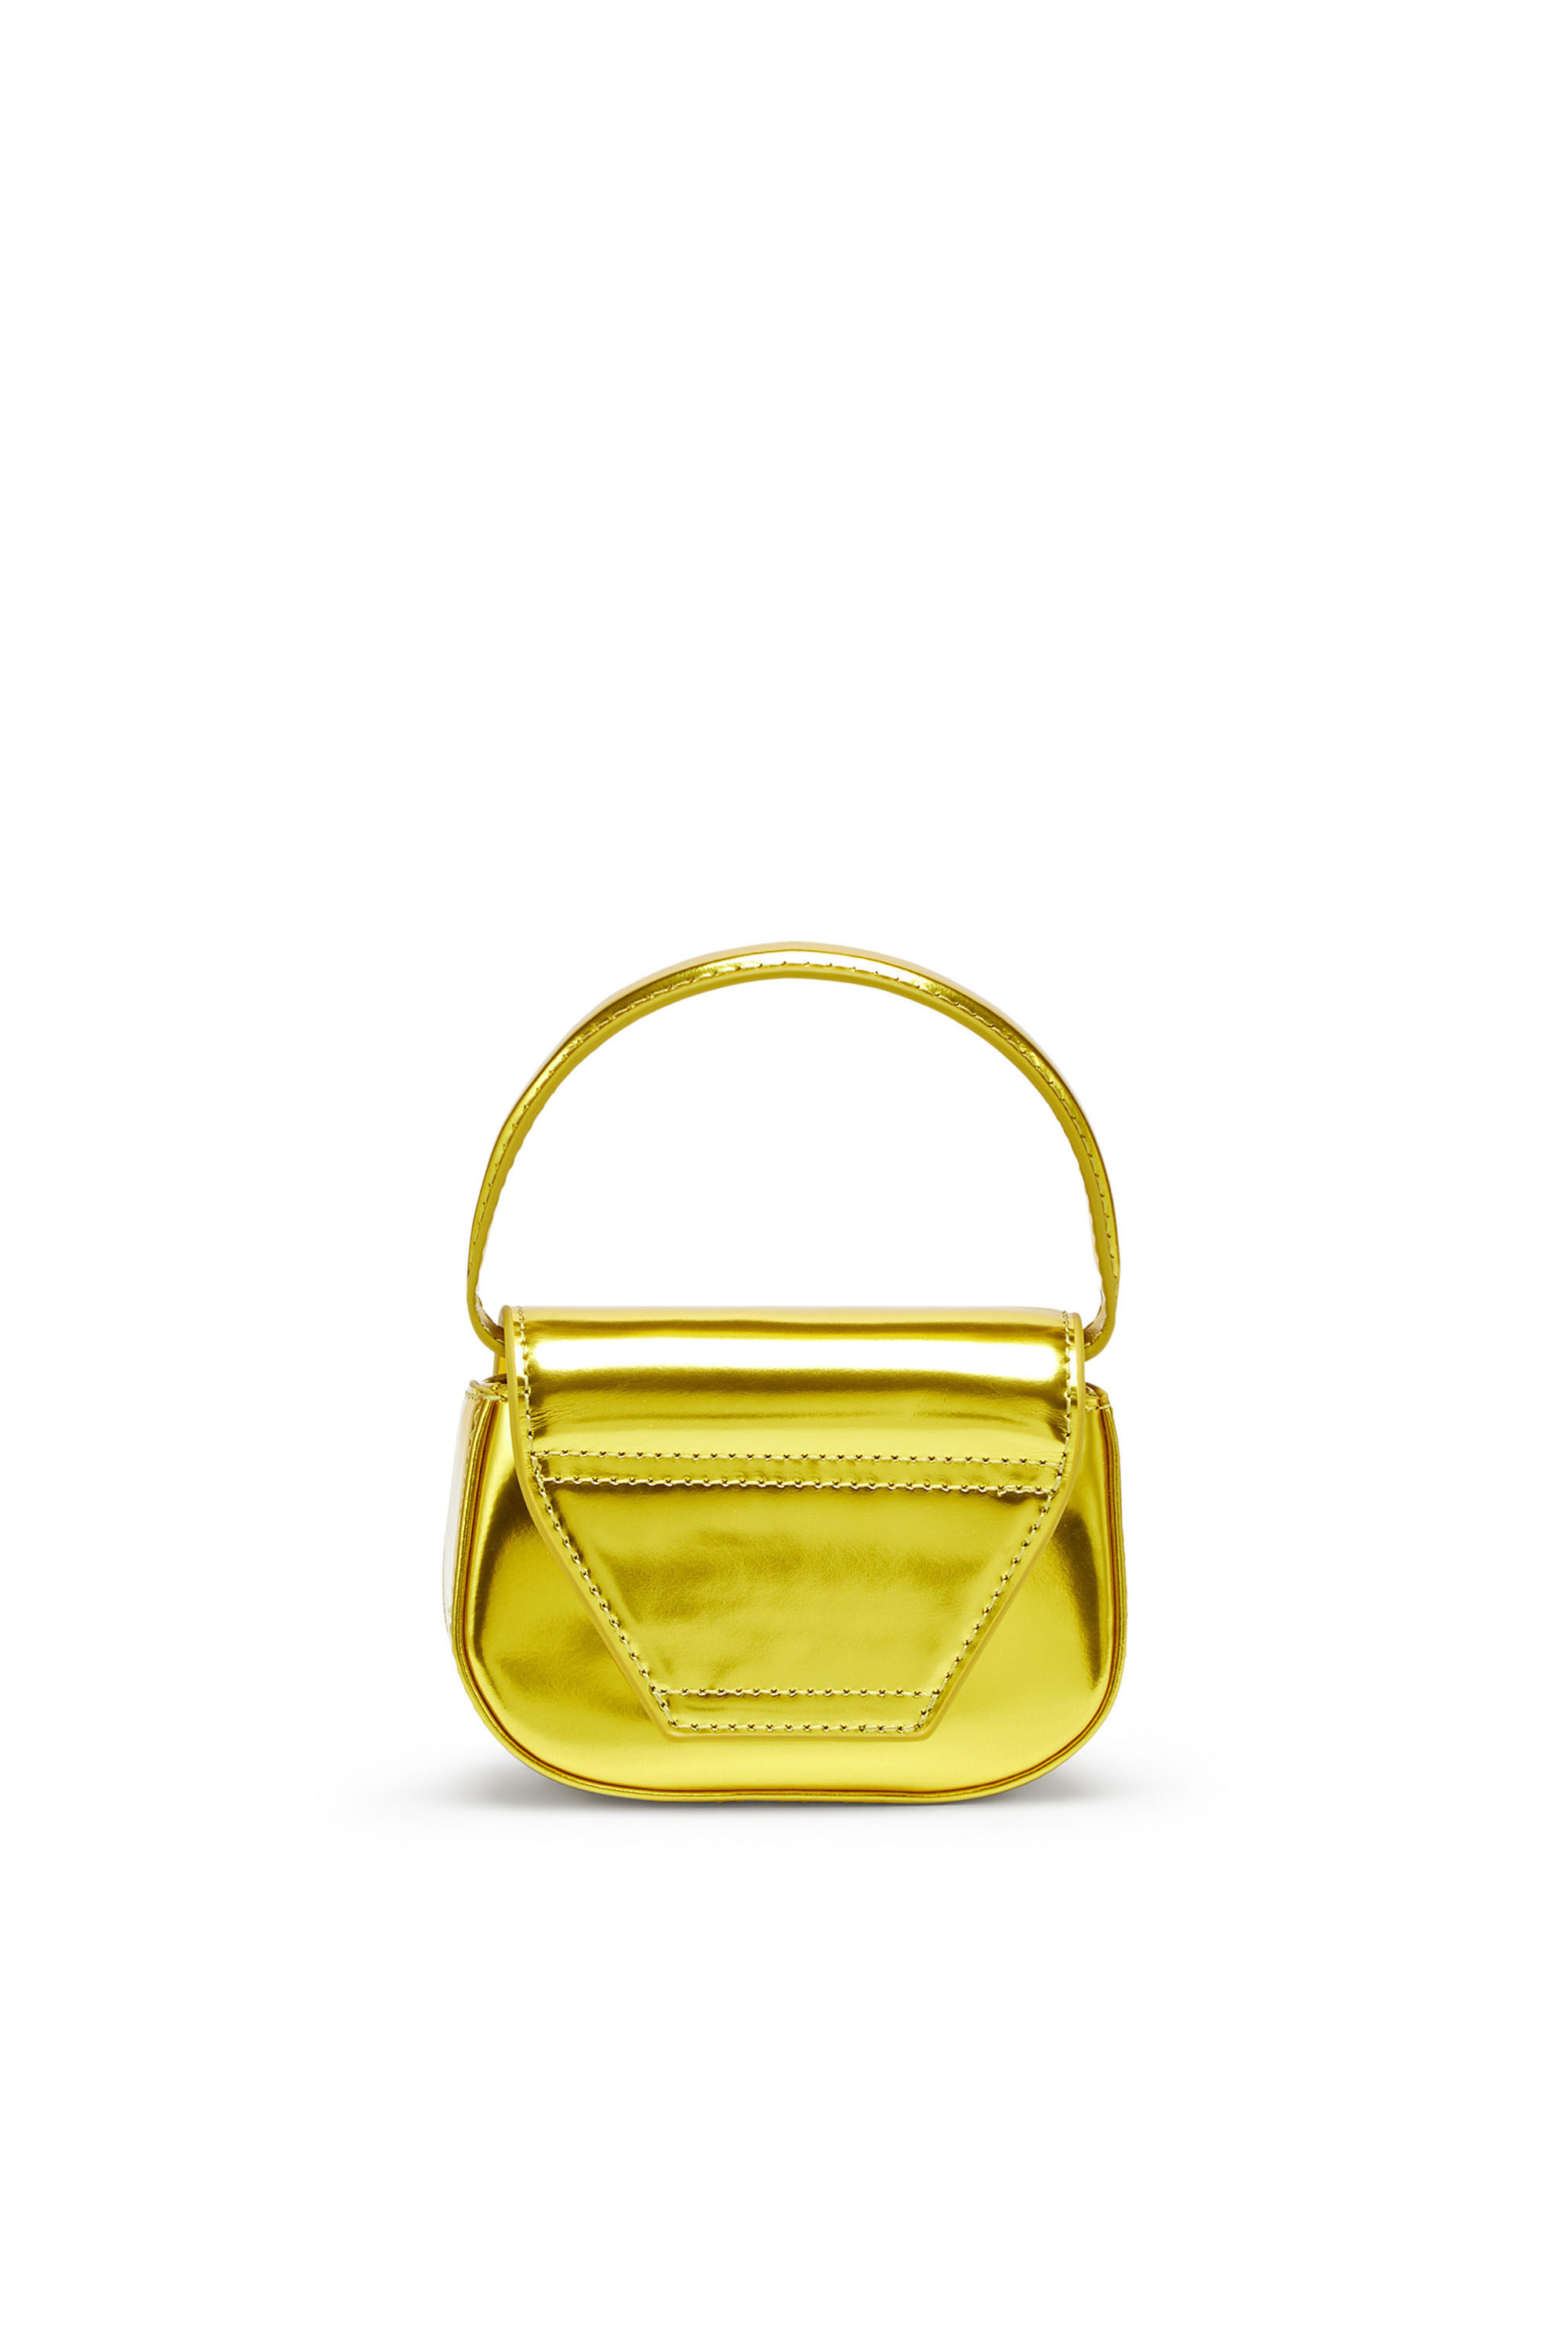 Diesel - 1DR-XS-S, Woman 1DR-XS-S-Iconic mini bag in mirrored leather in Yellow - Image 3